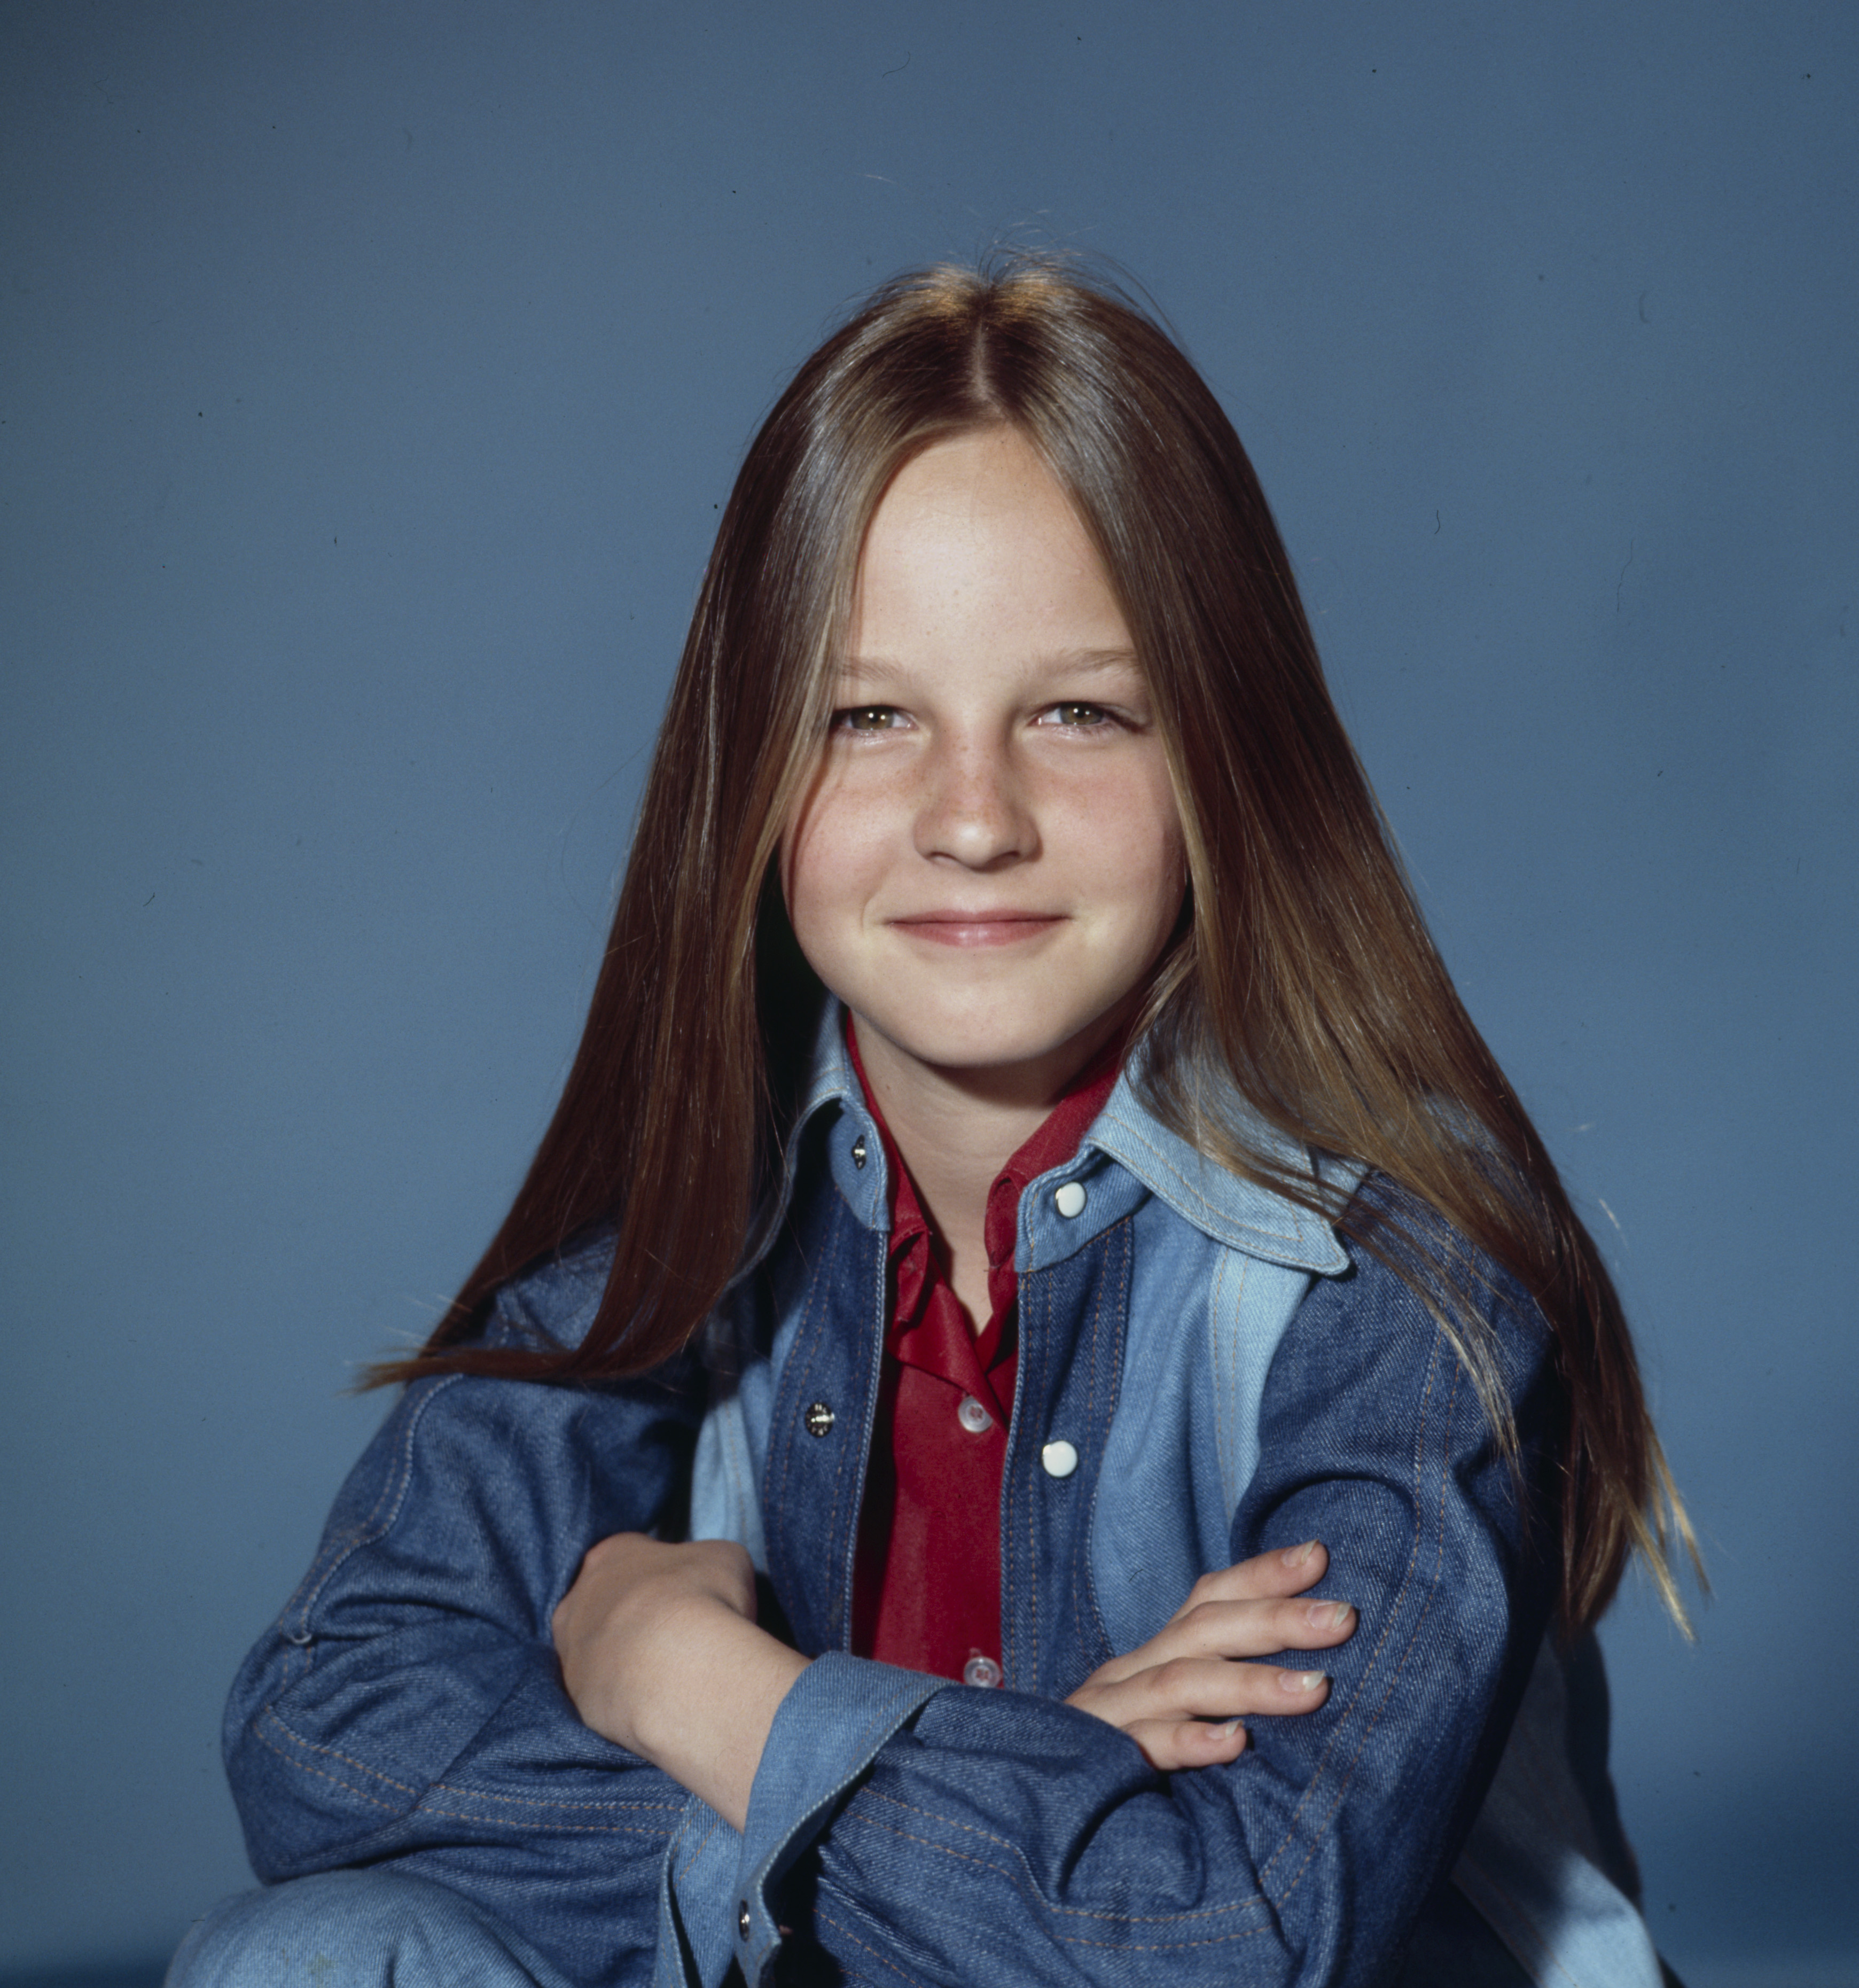 Helen Hunt poses for promotional photo for "Swiss Family Robinson" in 1975 | Source: Getty Images